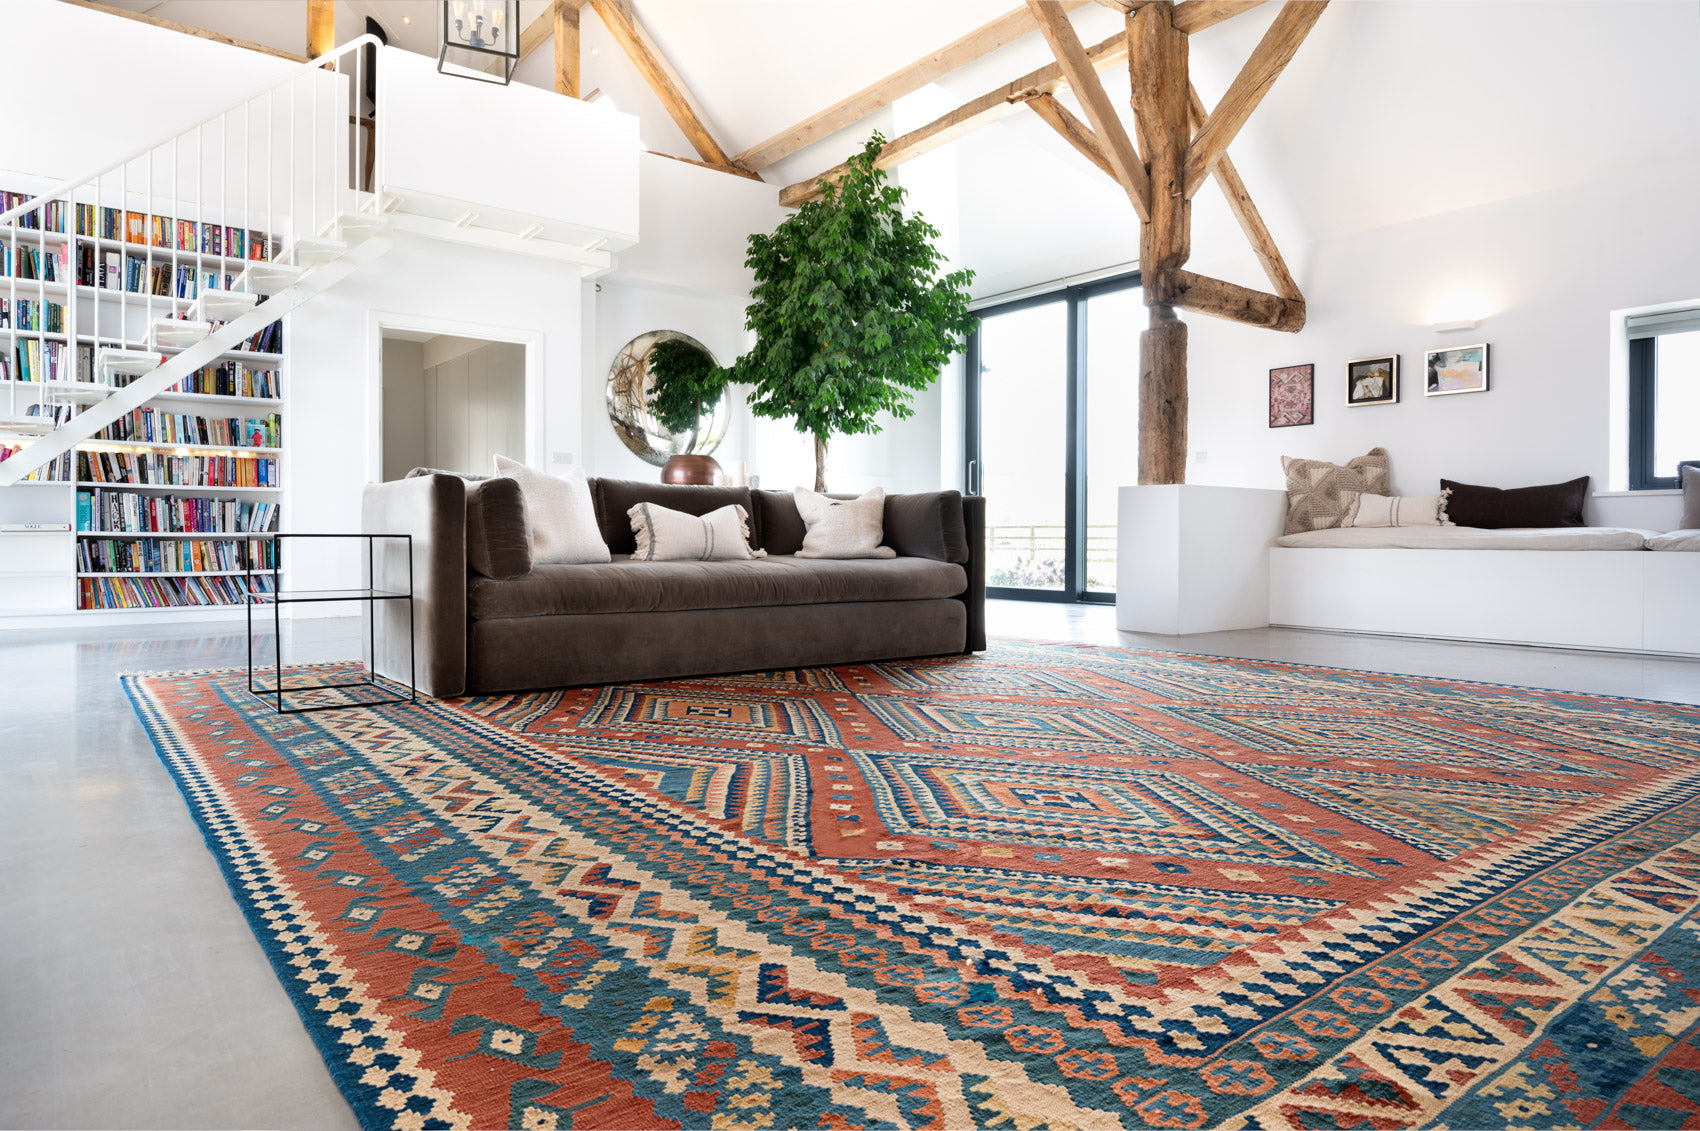 Persian rugs, oriental rugs, uk rugs, london rugs, home accessories, covid-19, quarantine, stay at home, mini series, interior design, home design, design ideas, home isolation guide